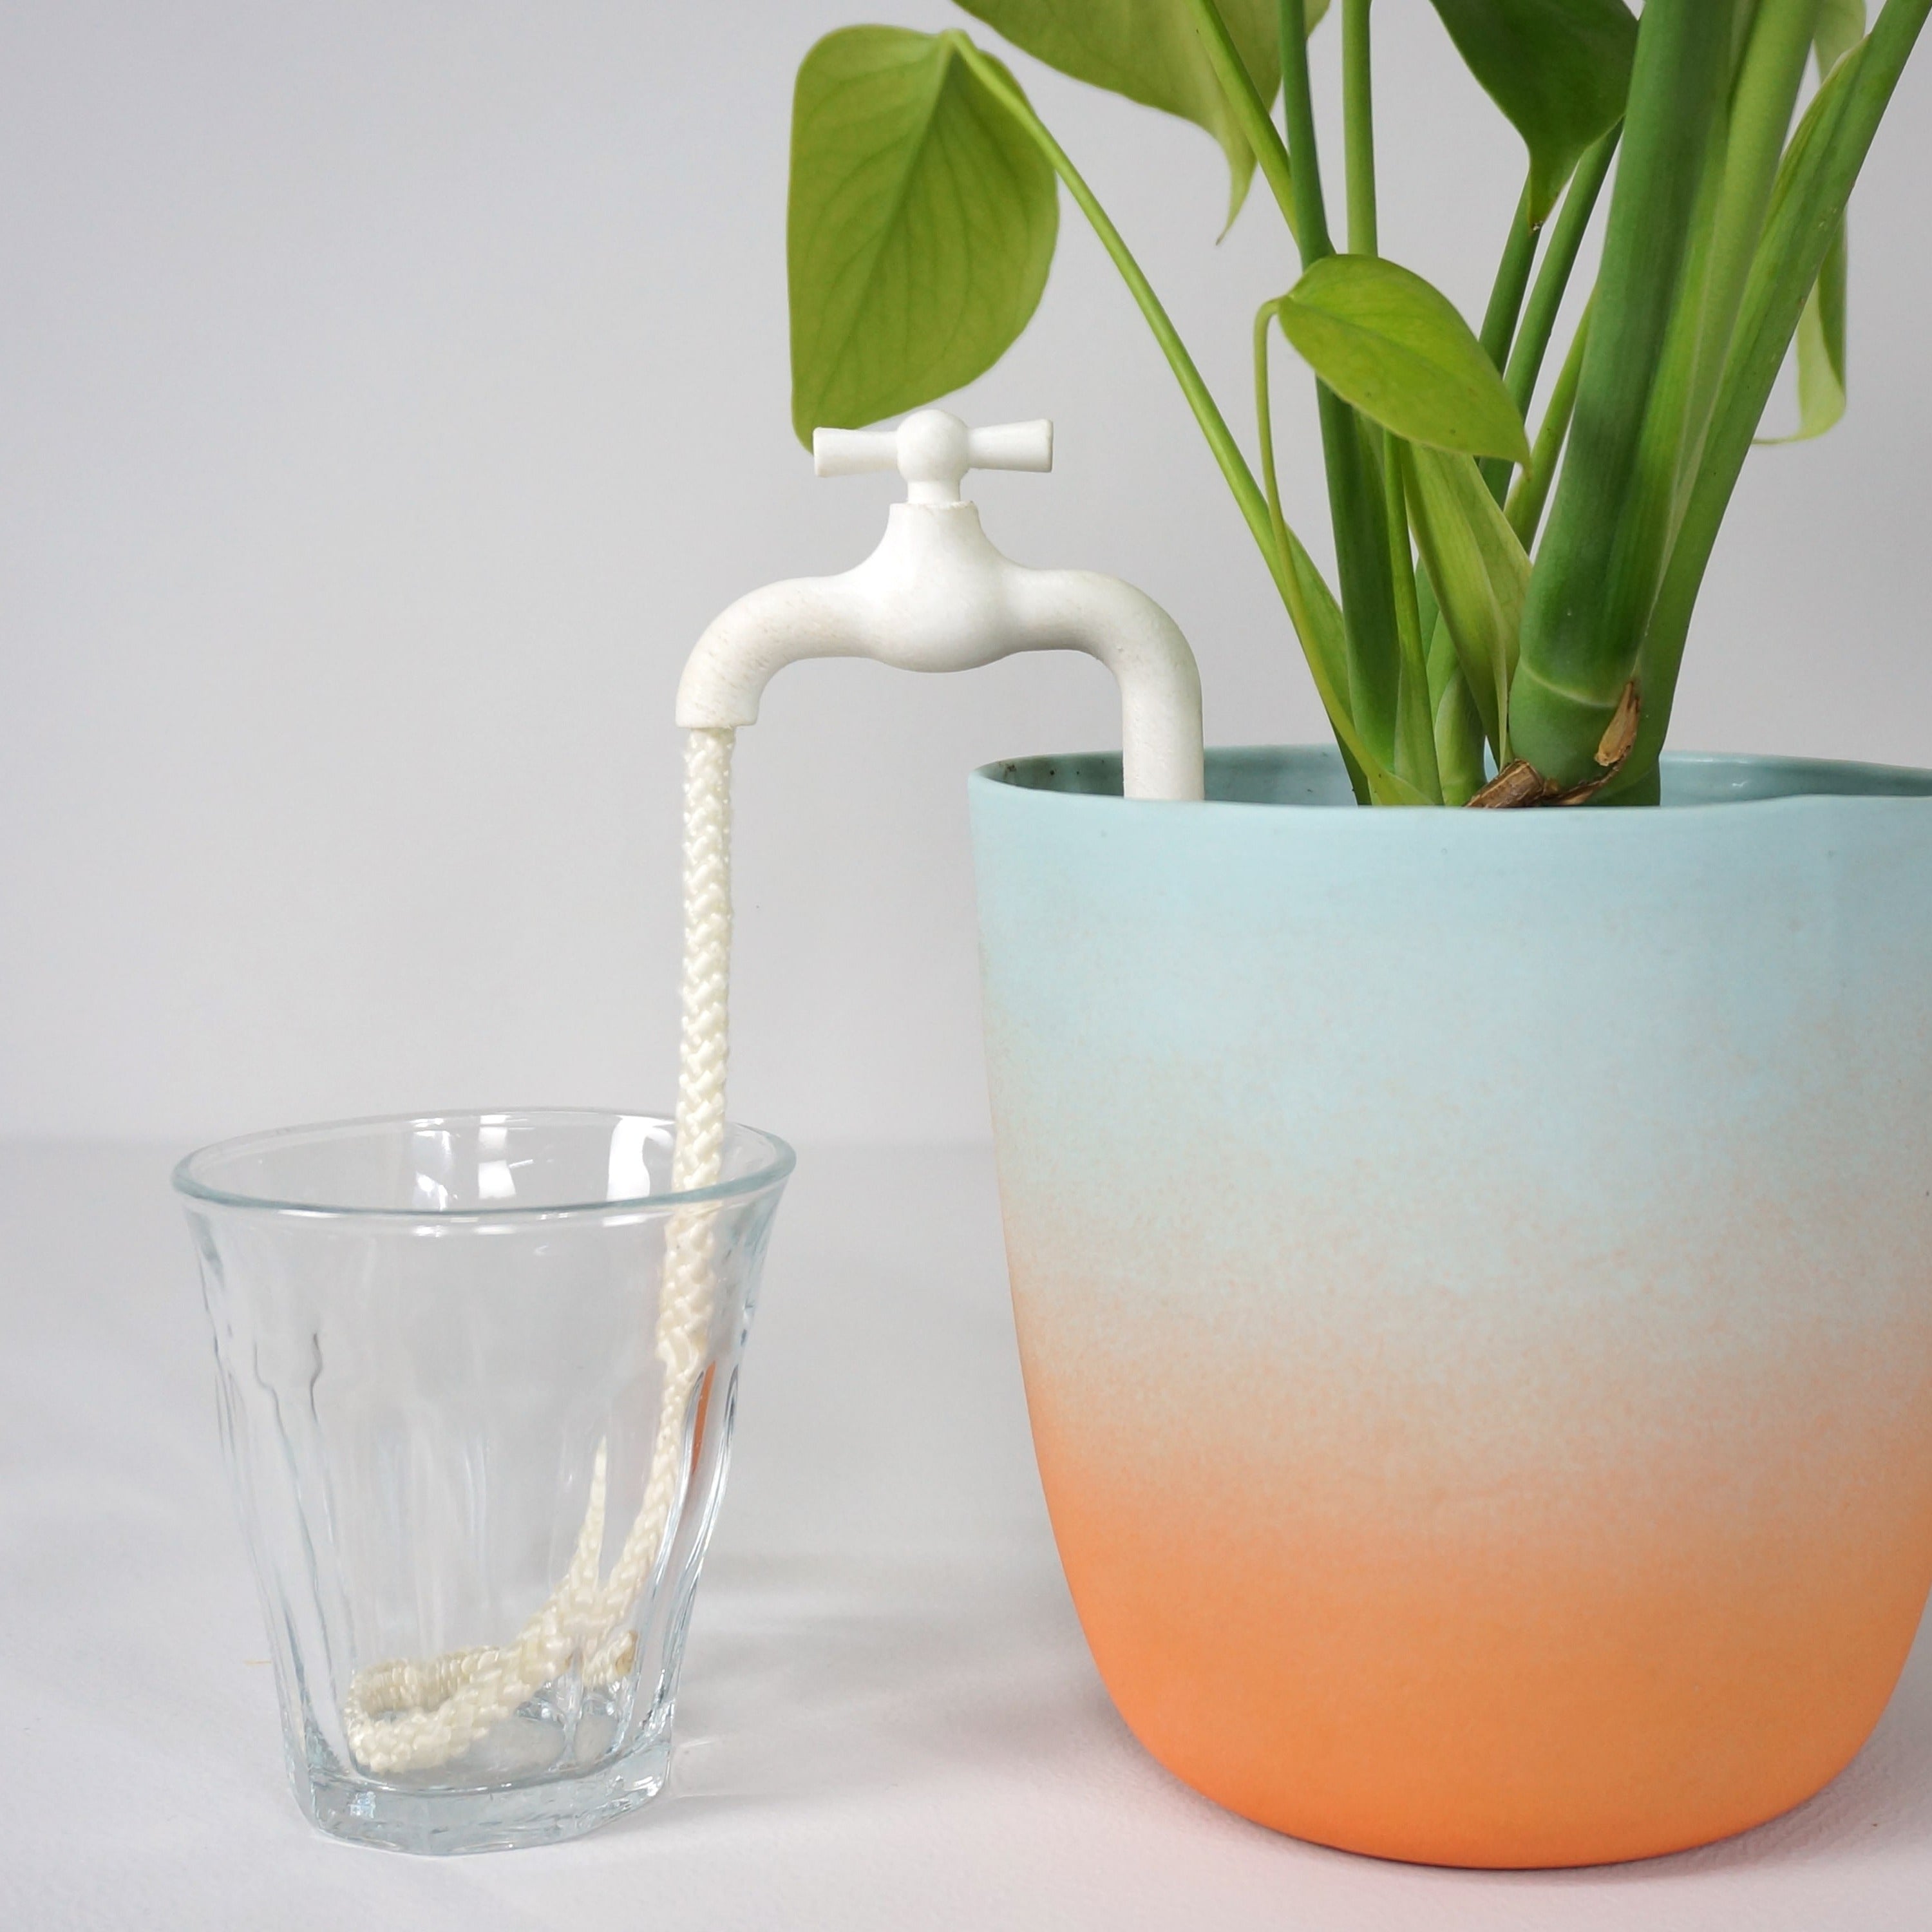 Plant Water Tap